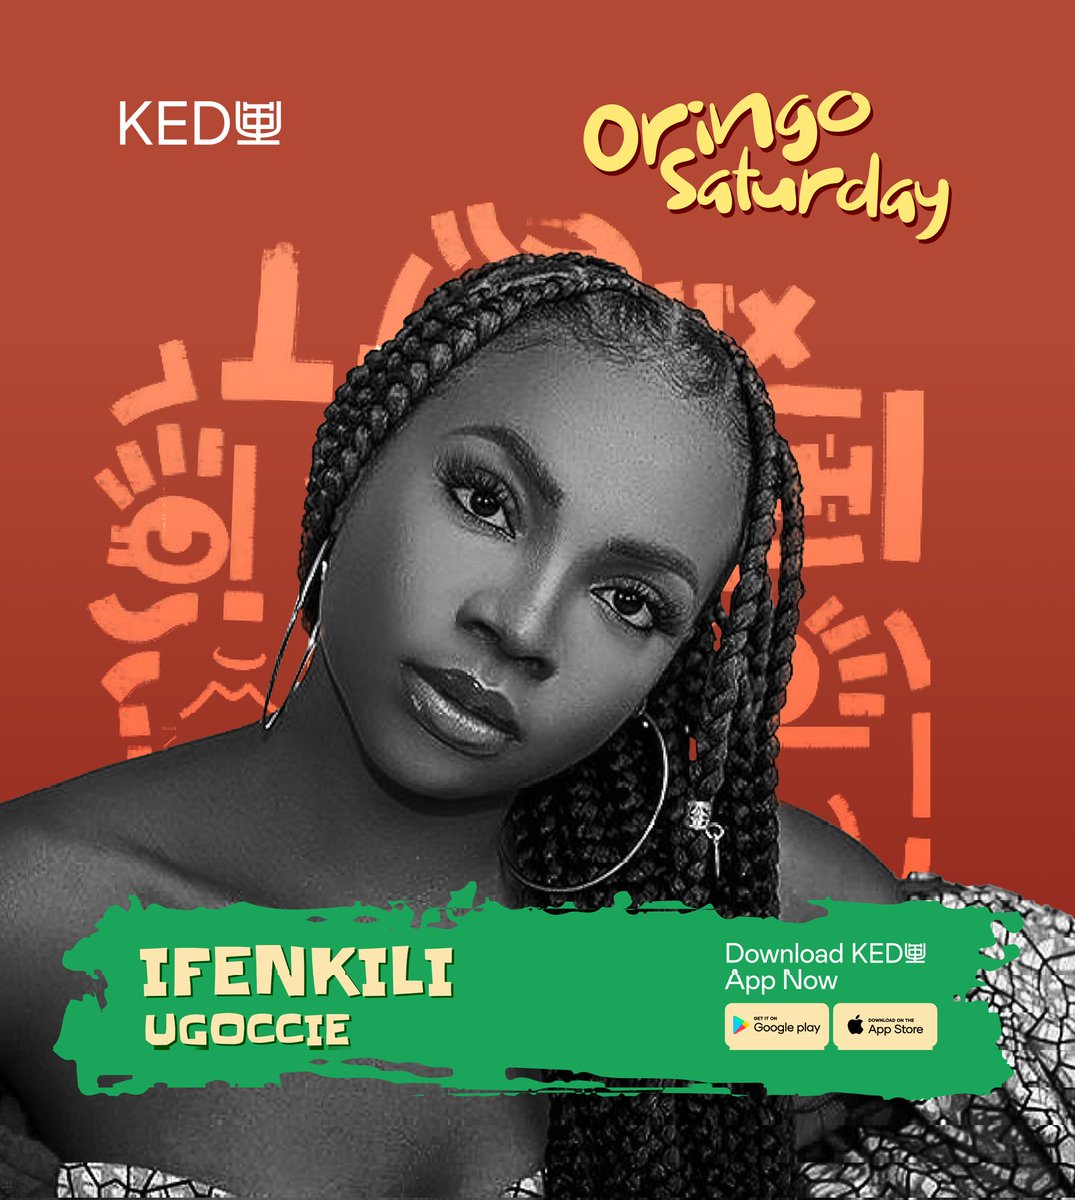 It's Move and Groove Saturday #OringoSaturday.

Today, we're dancing to @ugoccie - Ifenkili.

It's getting hot in the community, Join in with your dancing shoes!

#KEDU
#DownloadKedu
#IgbosConnect
#IgboApp